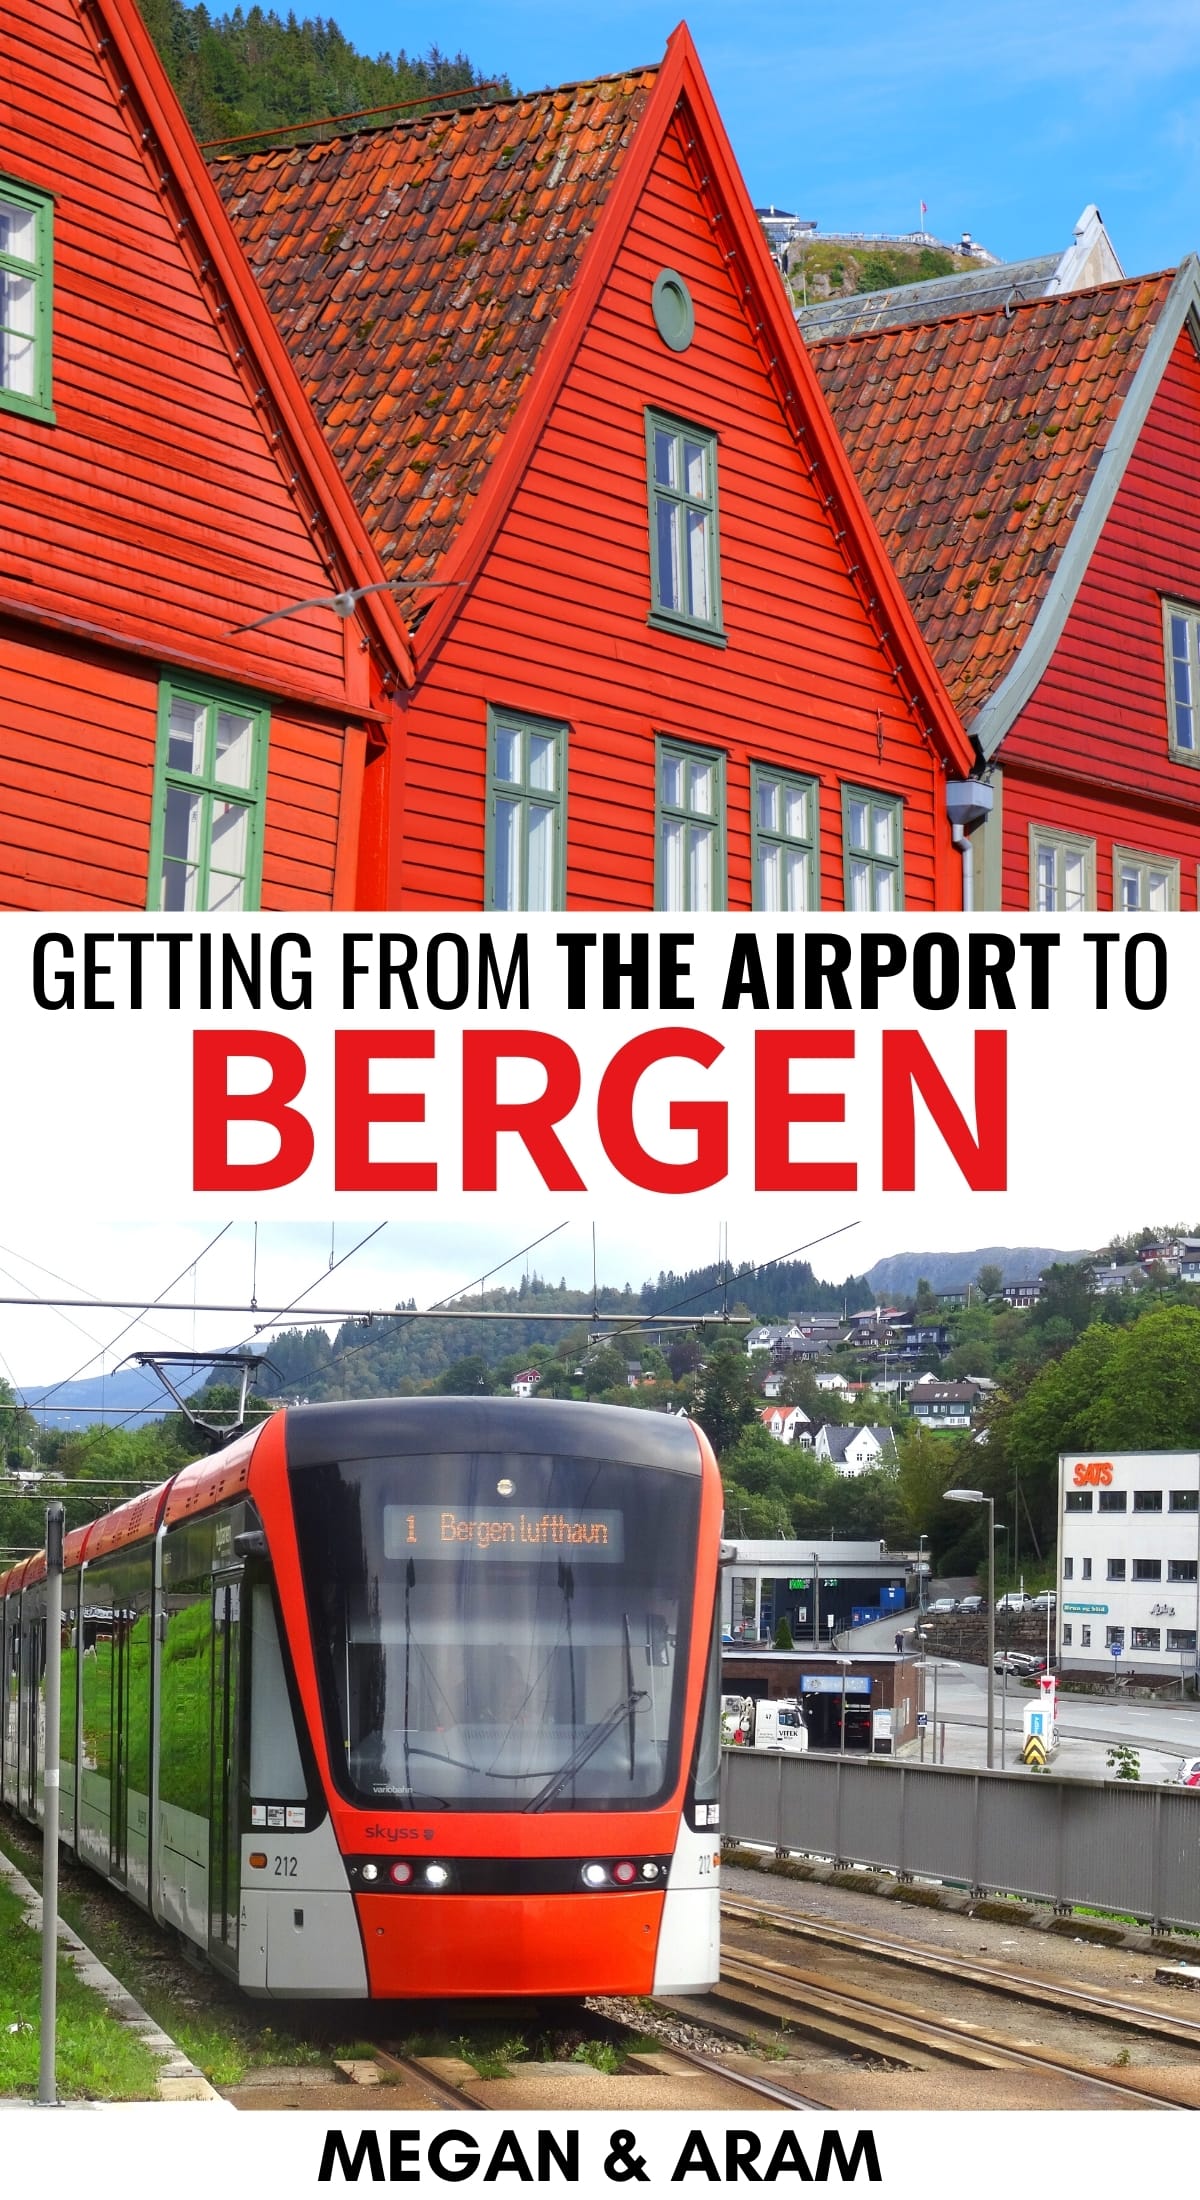 Seeking options for getting from the Bergen Airport to city? This guide details 5 options to get from the Bergen Airport to city center (include budget options!) | Things to do in Bergen | Bergen tips | Travel to Bergen | Visit Norway | Visit Bergen | Bergen travel guide | Bergen Norway | Flesland Airport